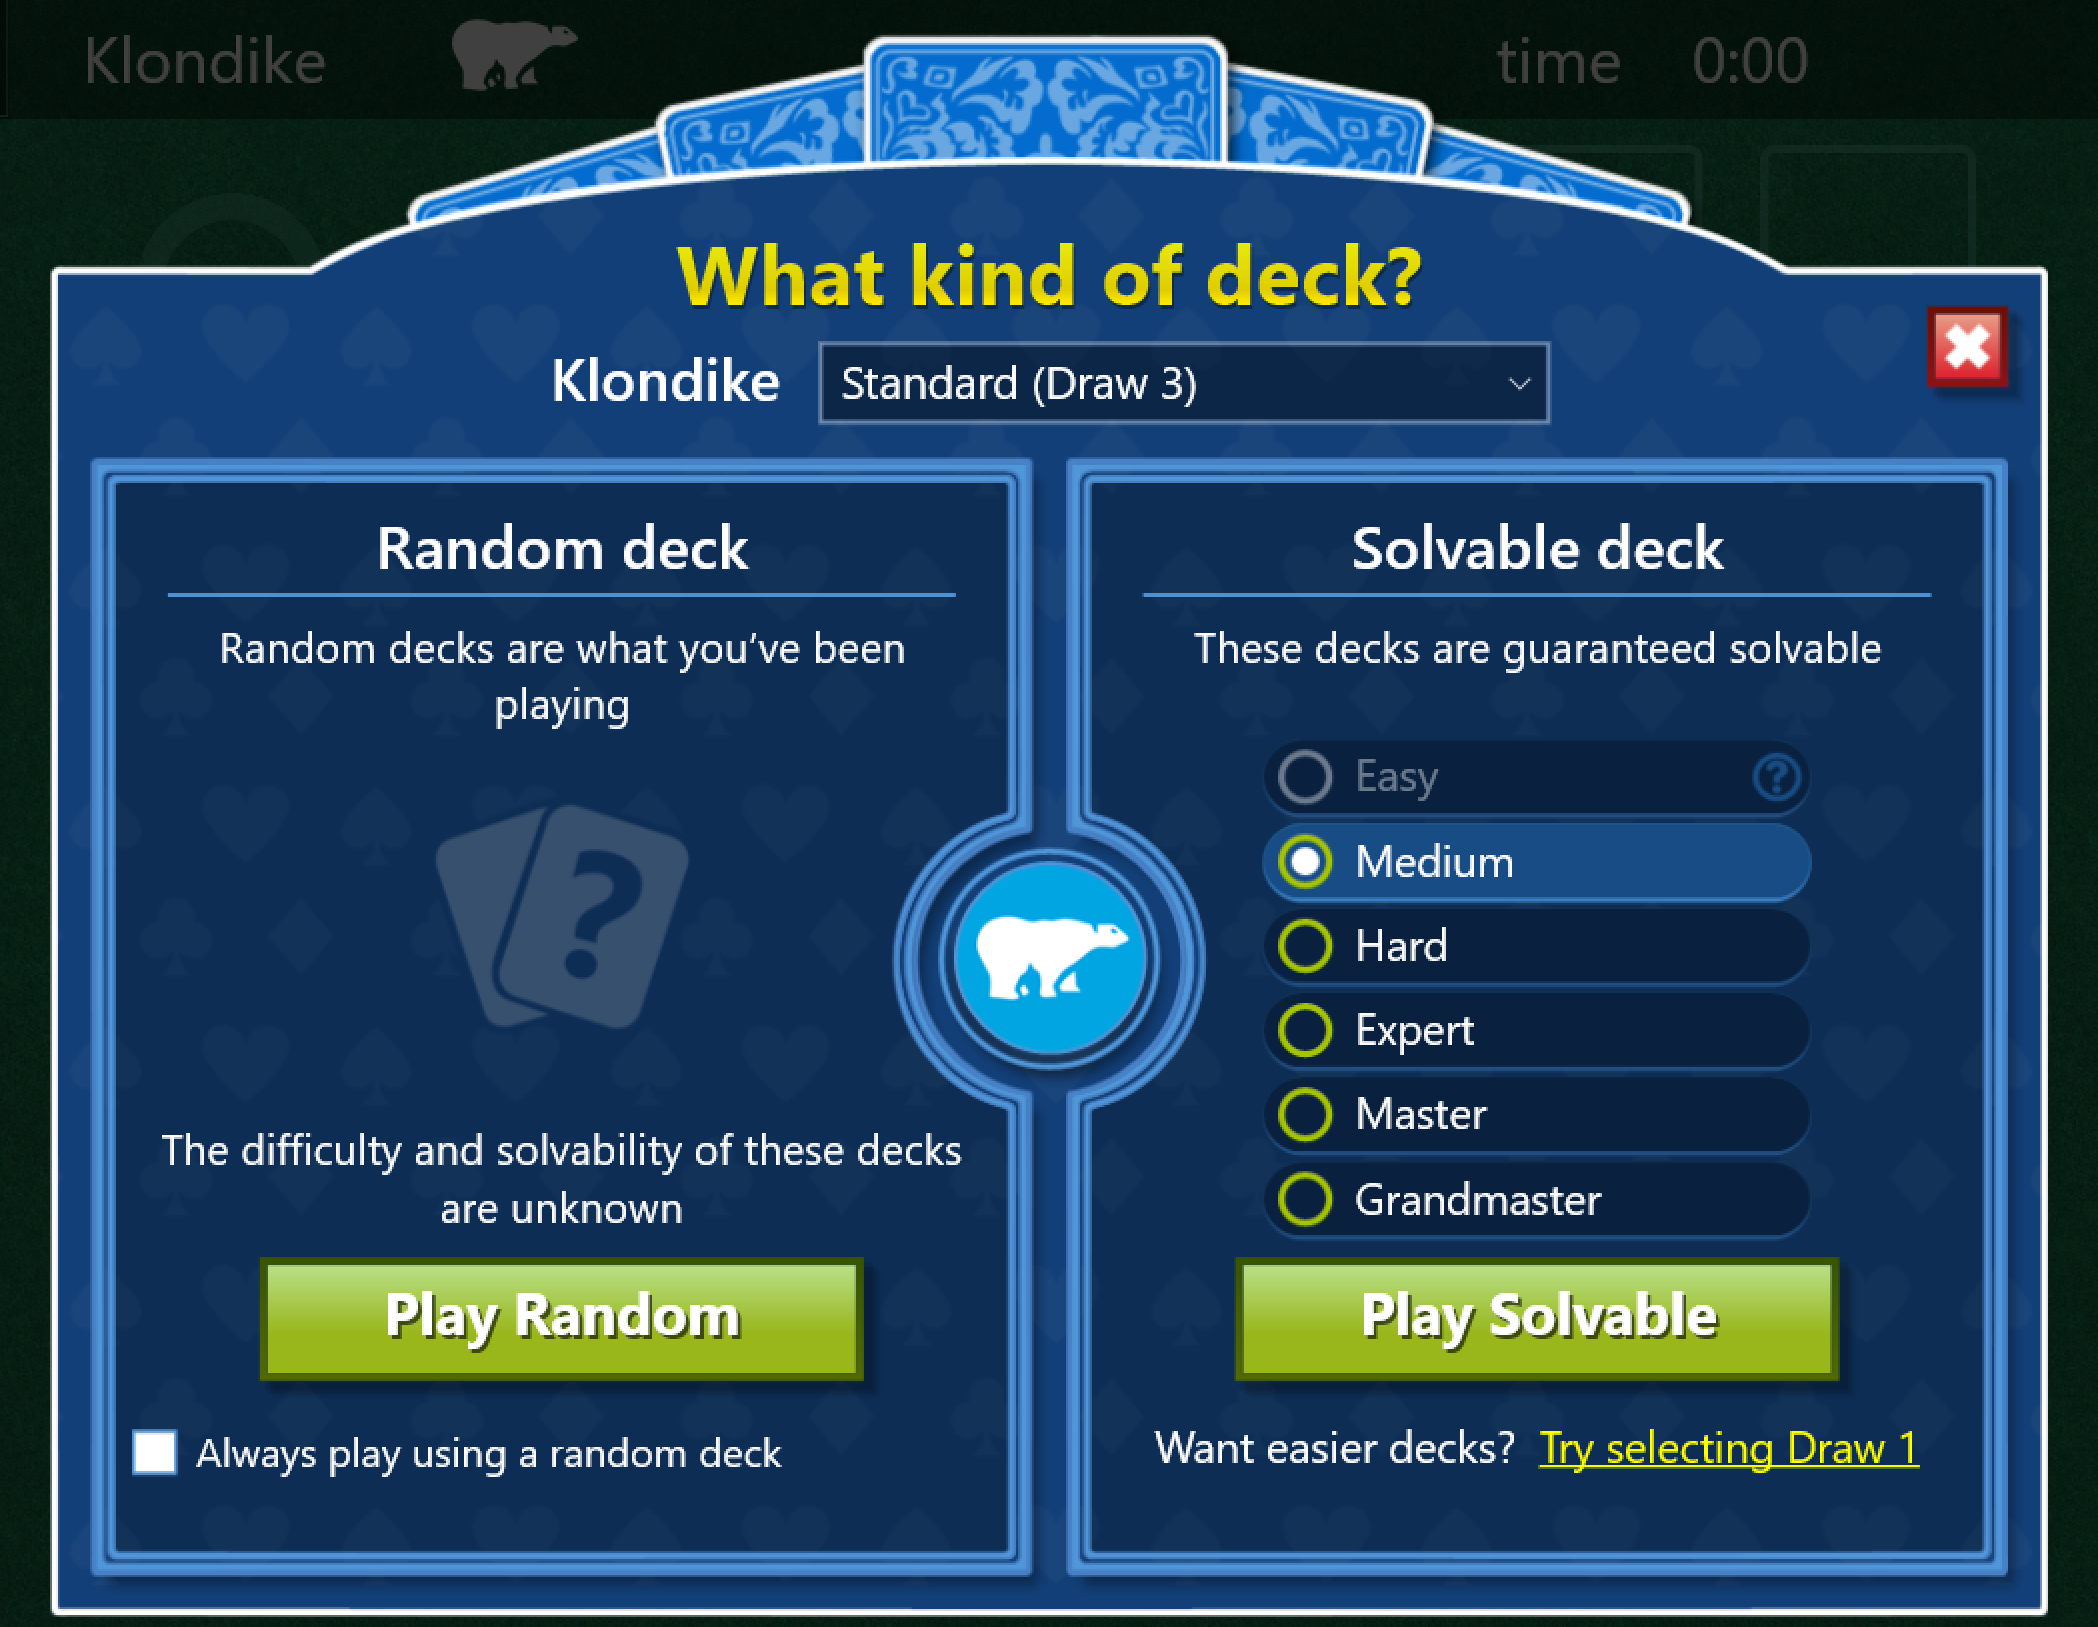 play klondike solitaire windows win10 what kind of deck?